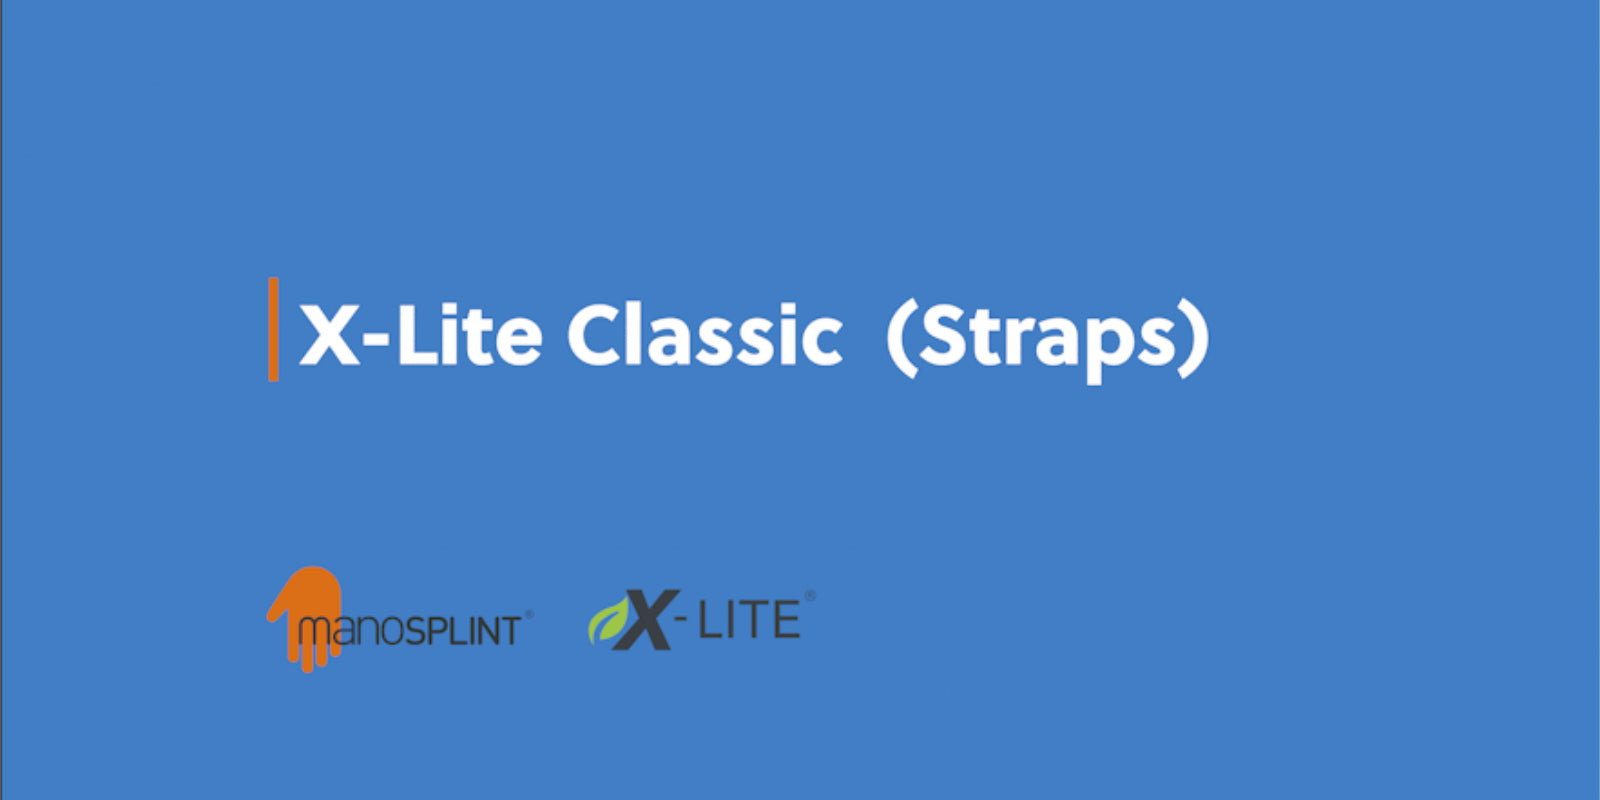 In this Video Alison Coyle shows us how to apply straps to a dorsal blocking splint made from X-Lite Classic.